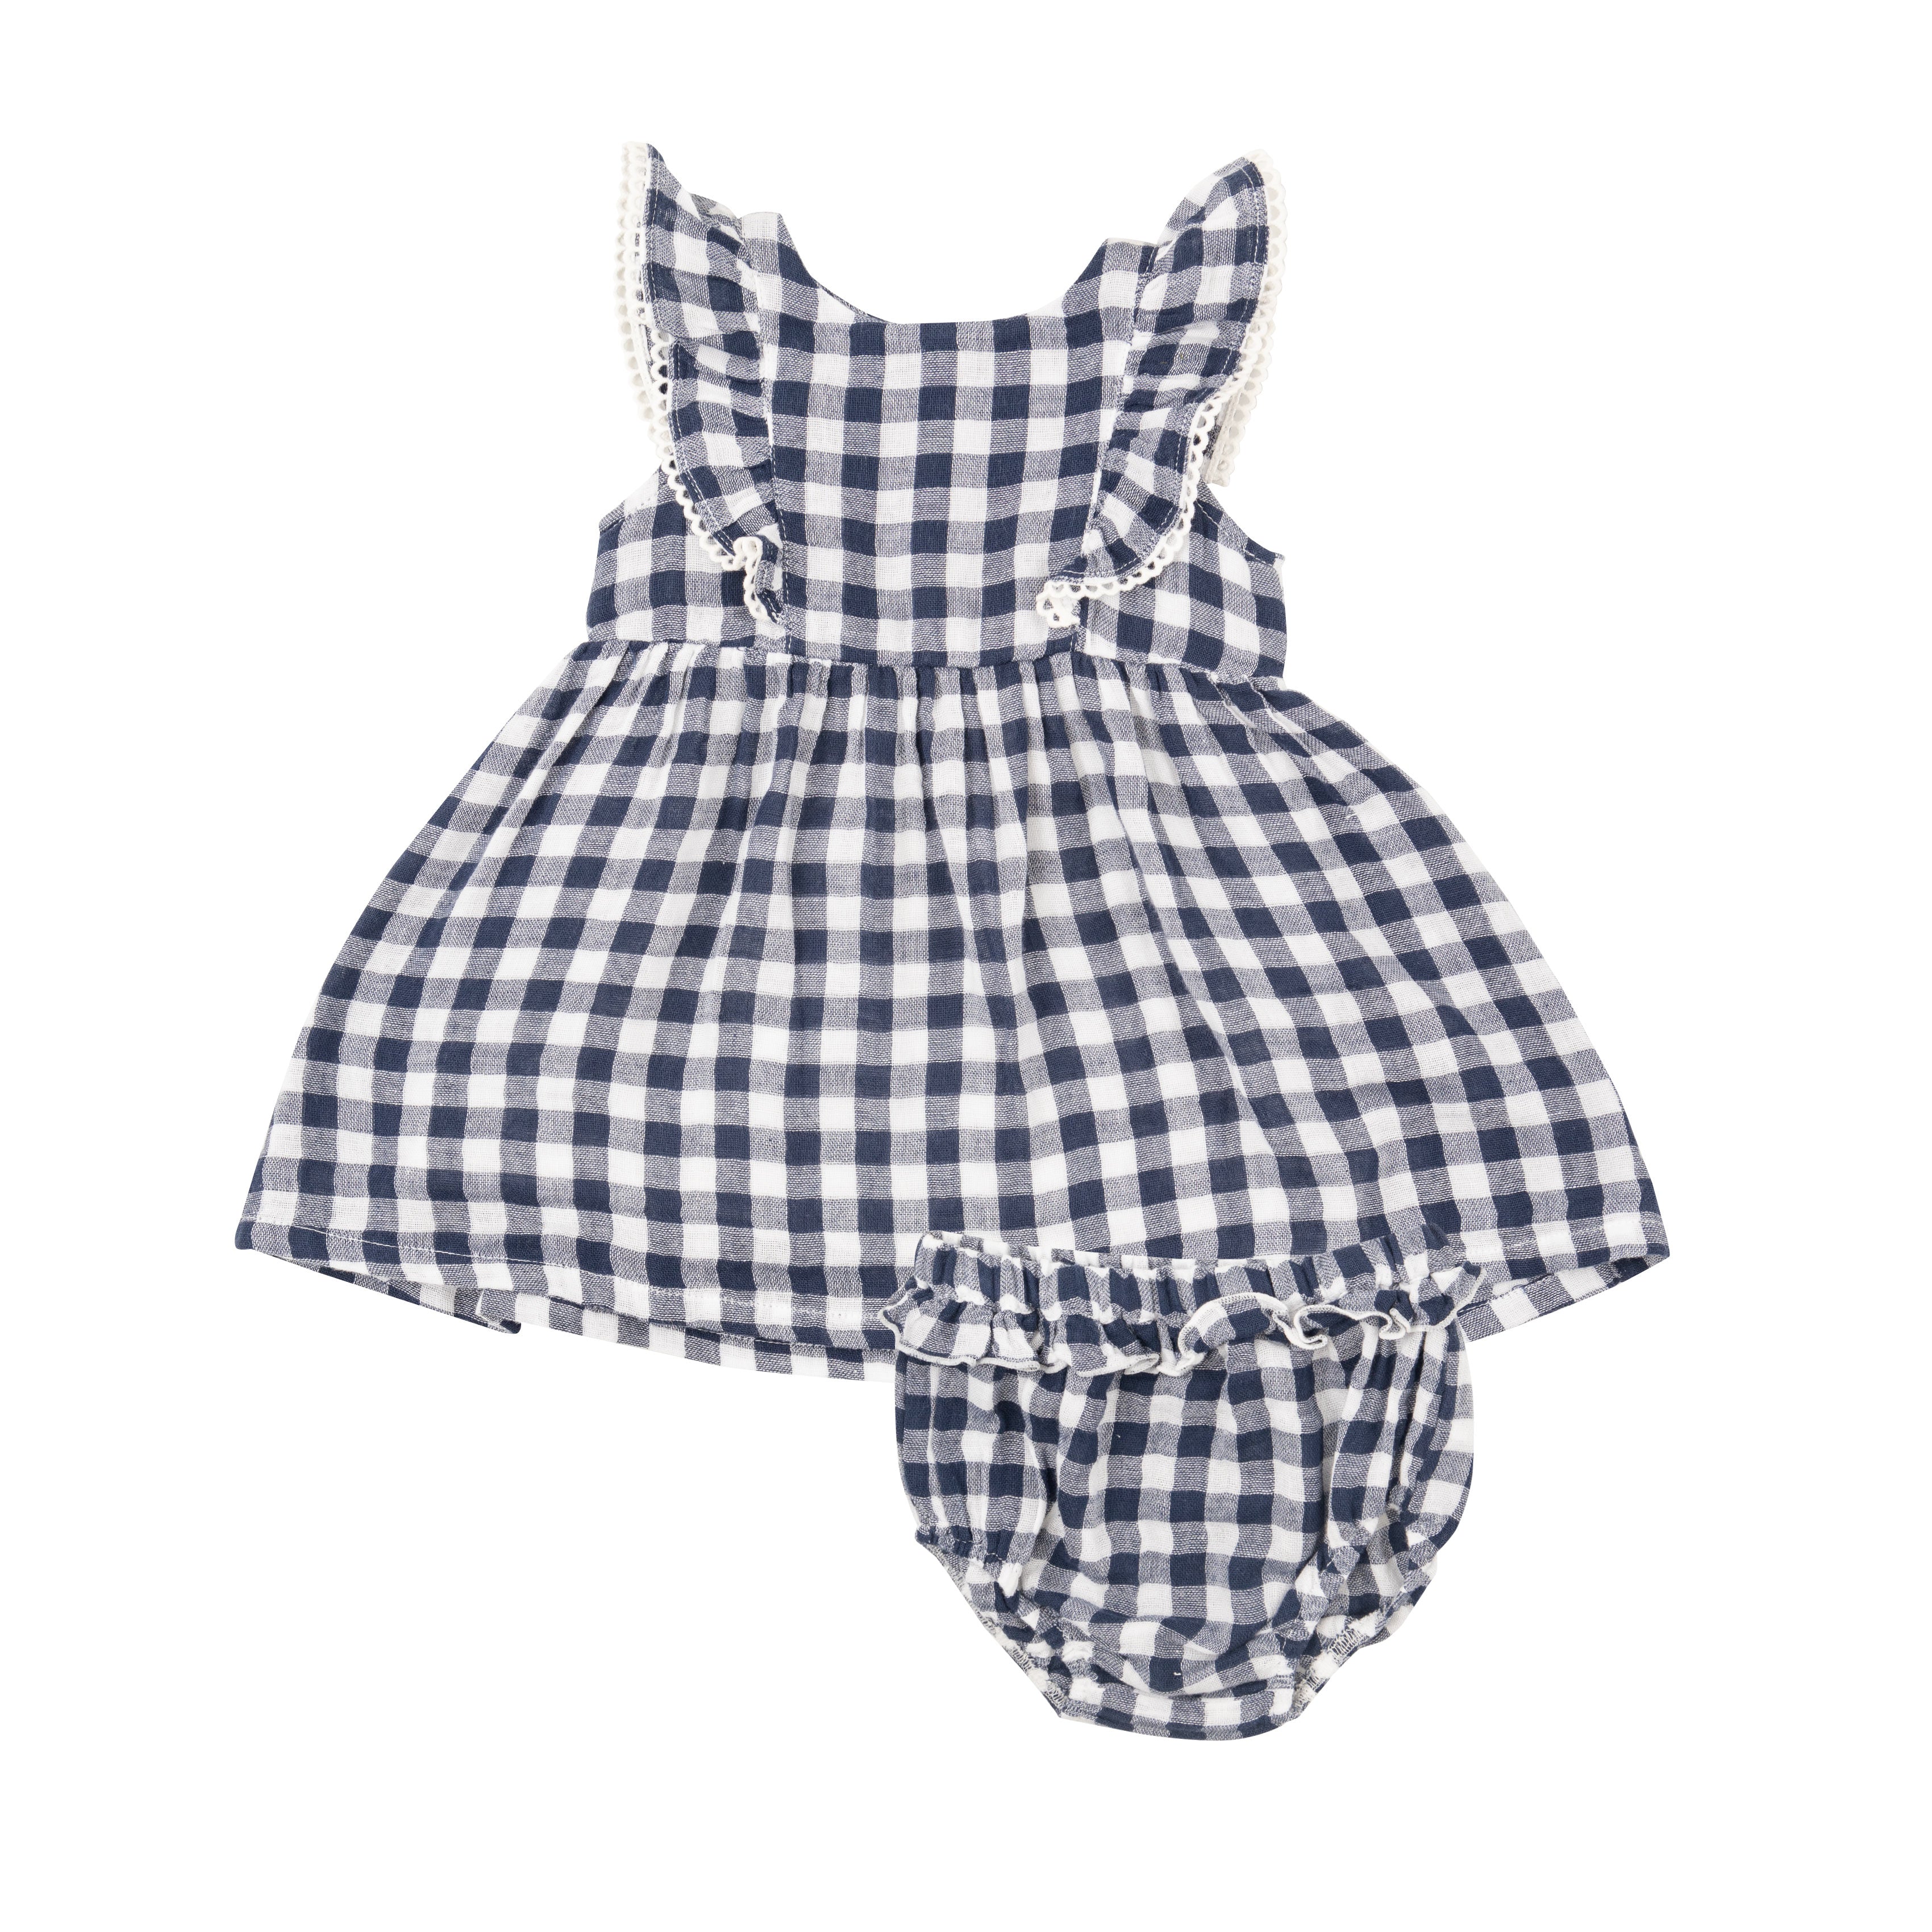 Gingham Navy Ruffle Dress + Diaper Cover - Twinkle Twinkle Little One